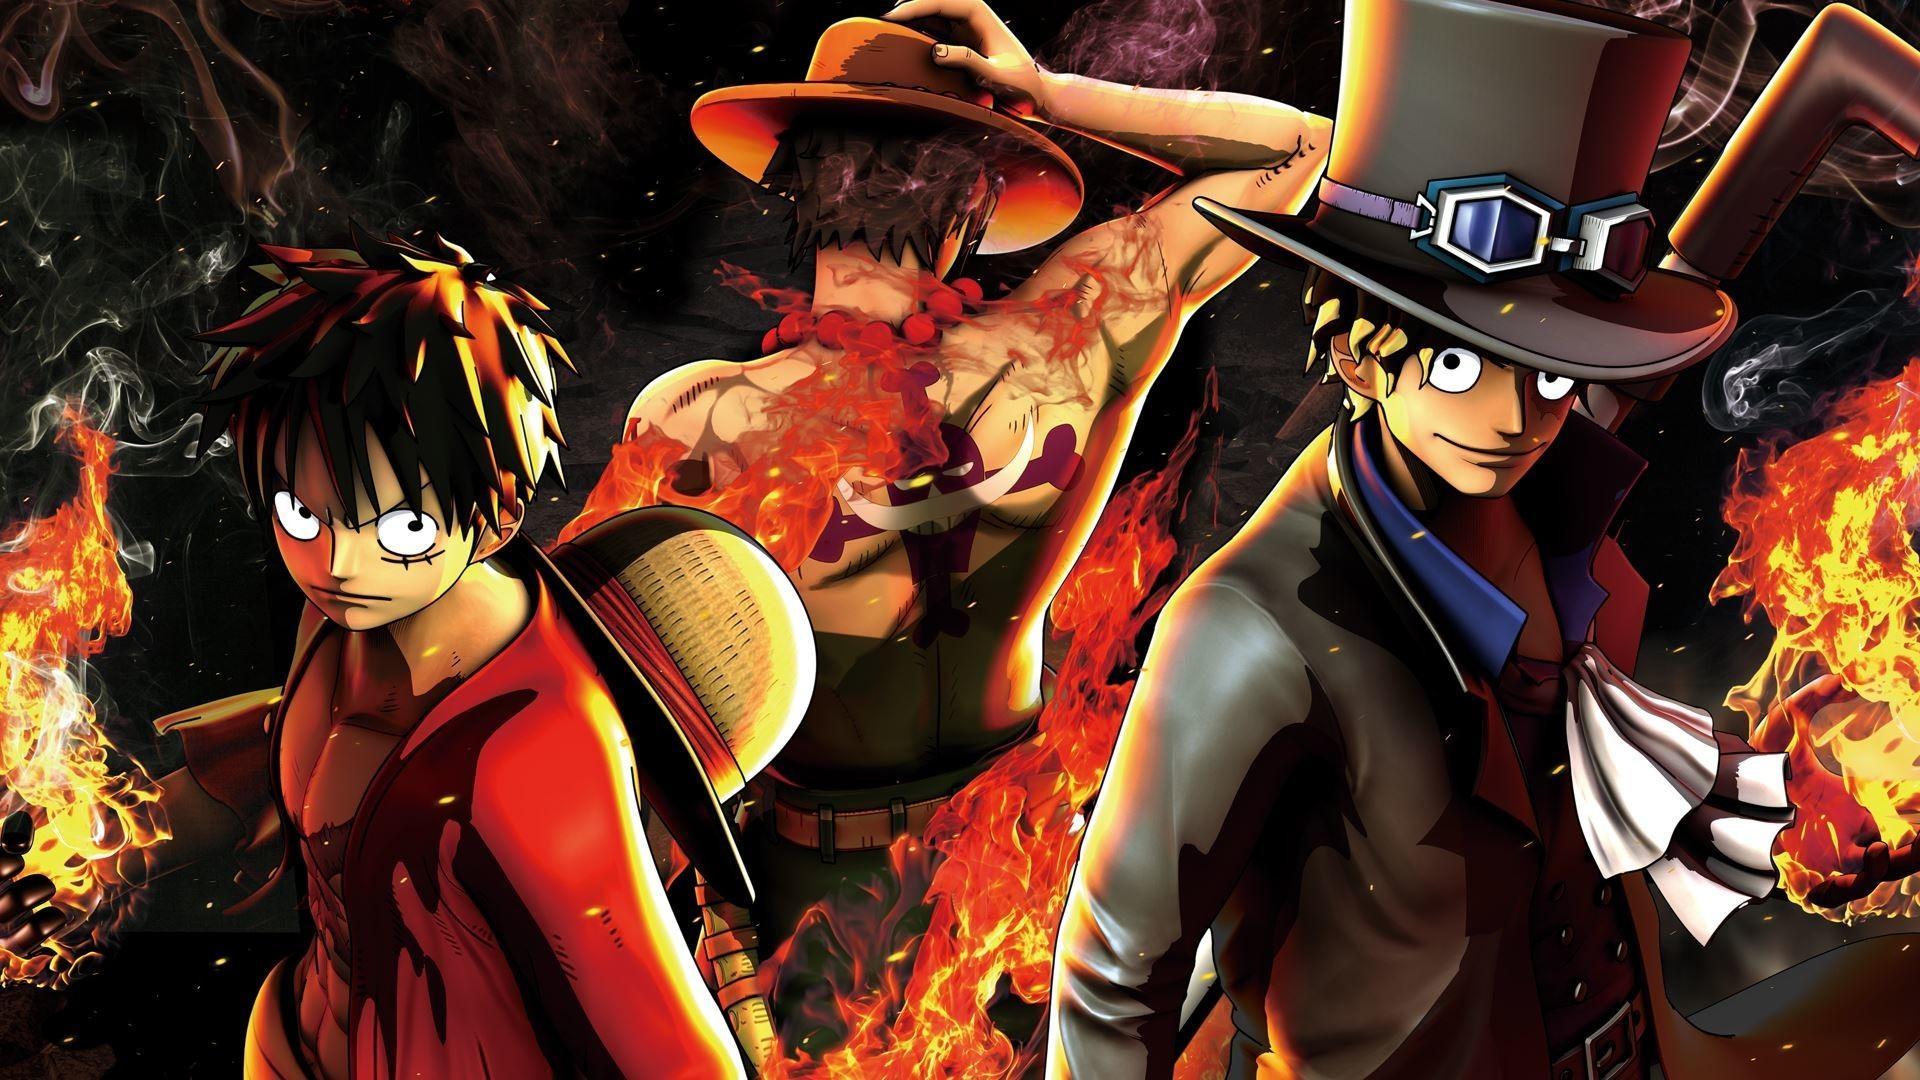 1920 x 1080 · jpeg - Anime One Piece 3D Wallpapers - Wallpaper Cave